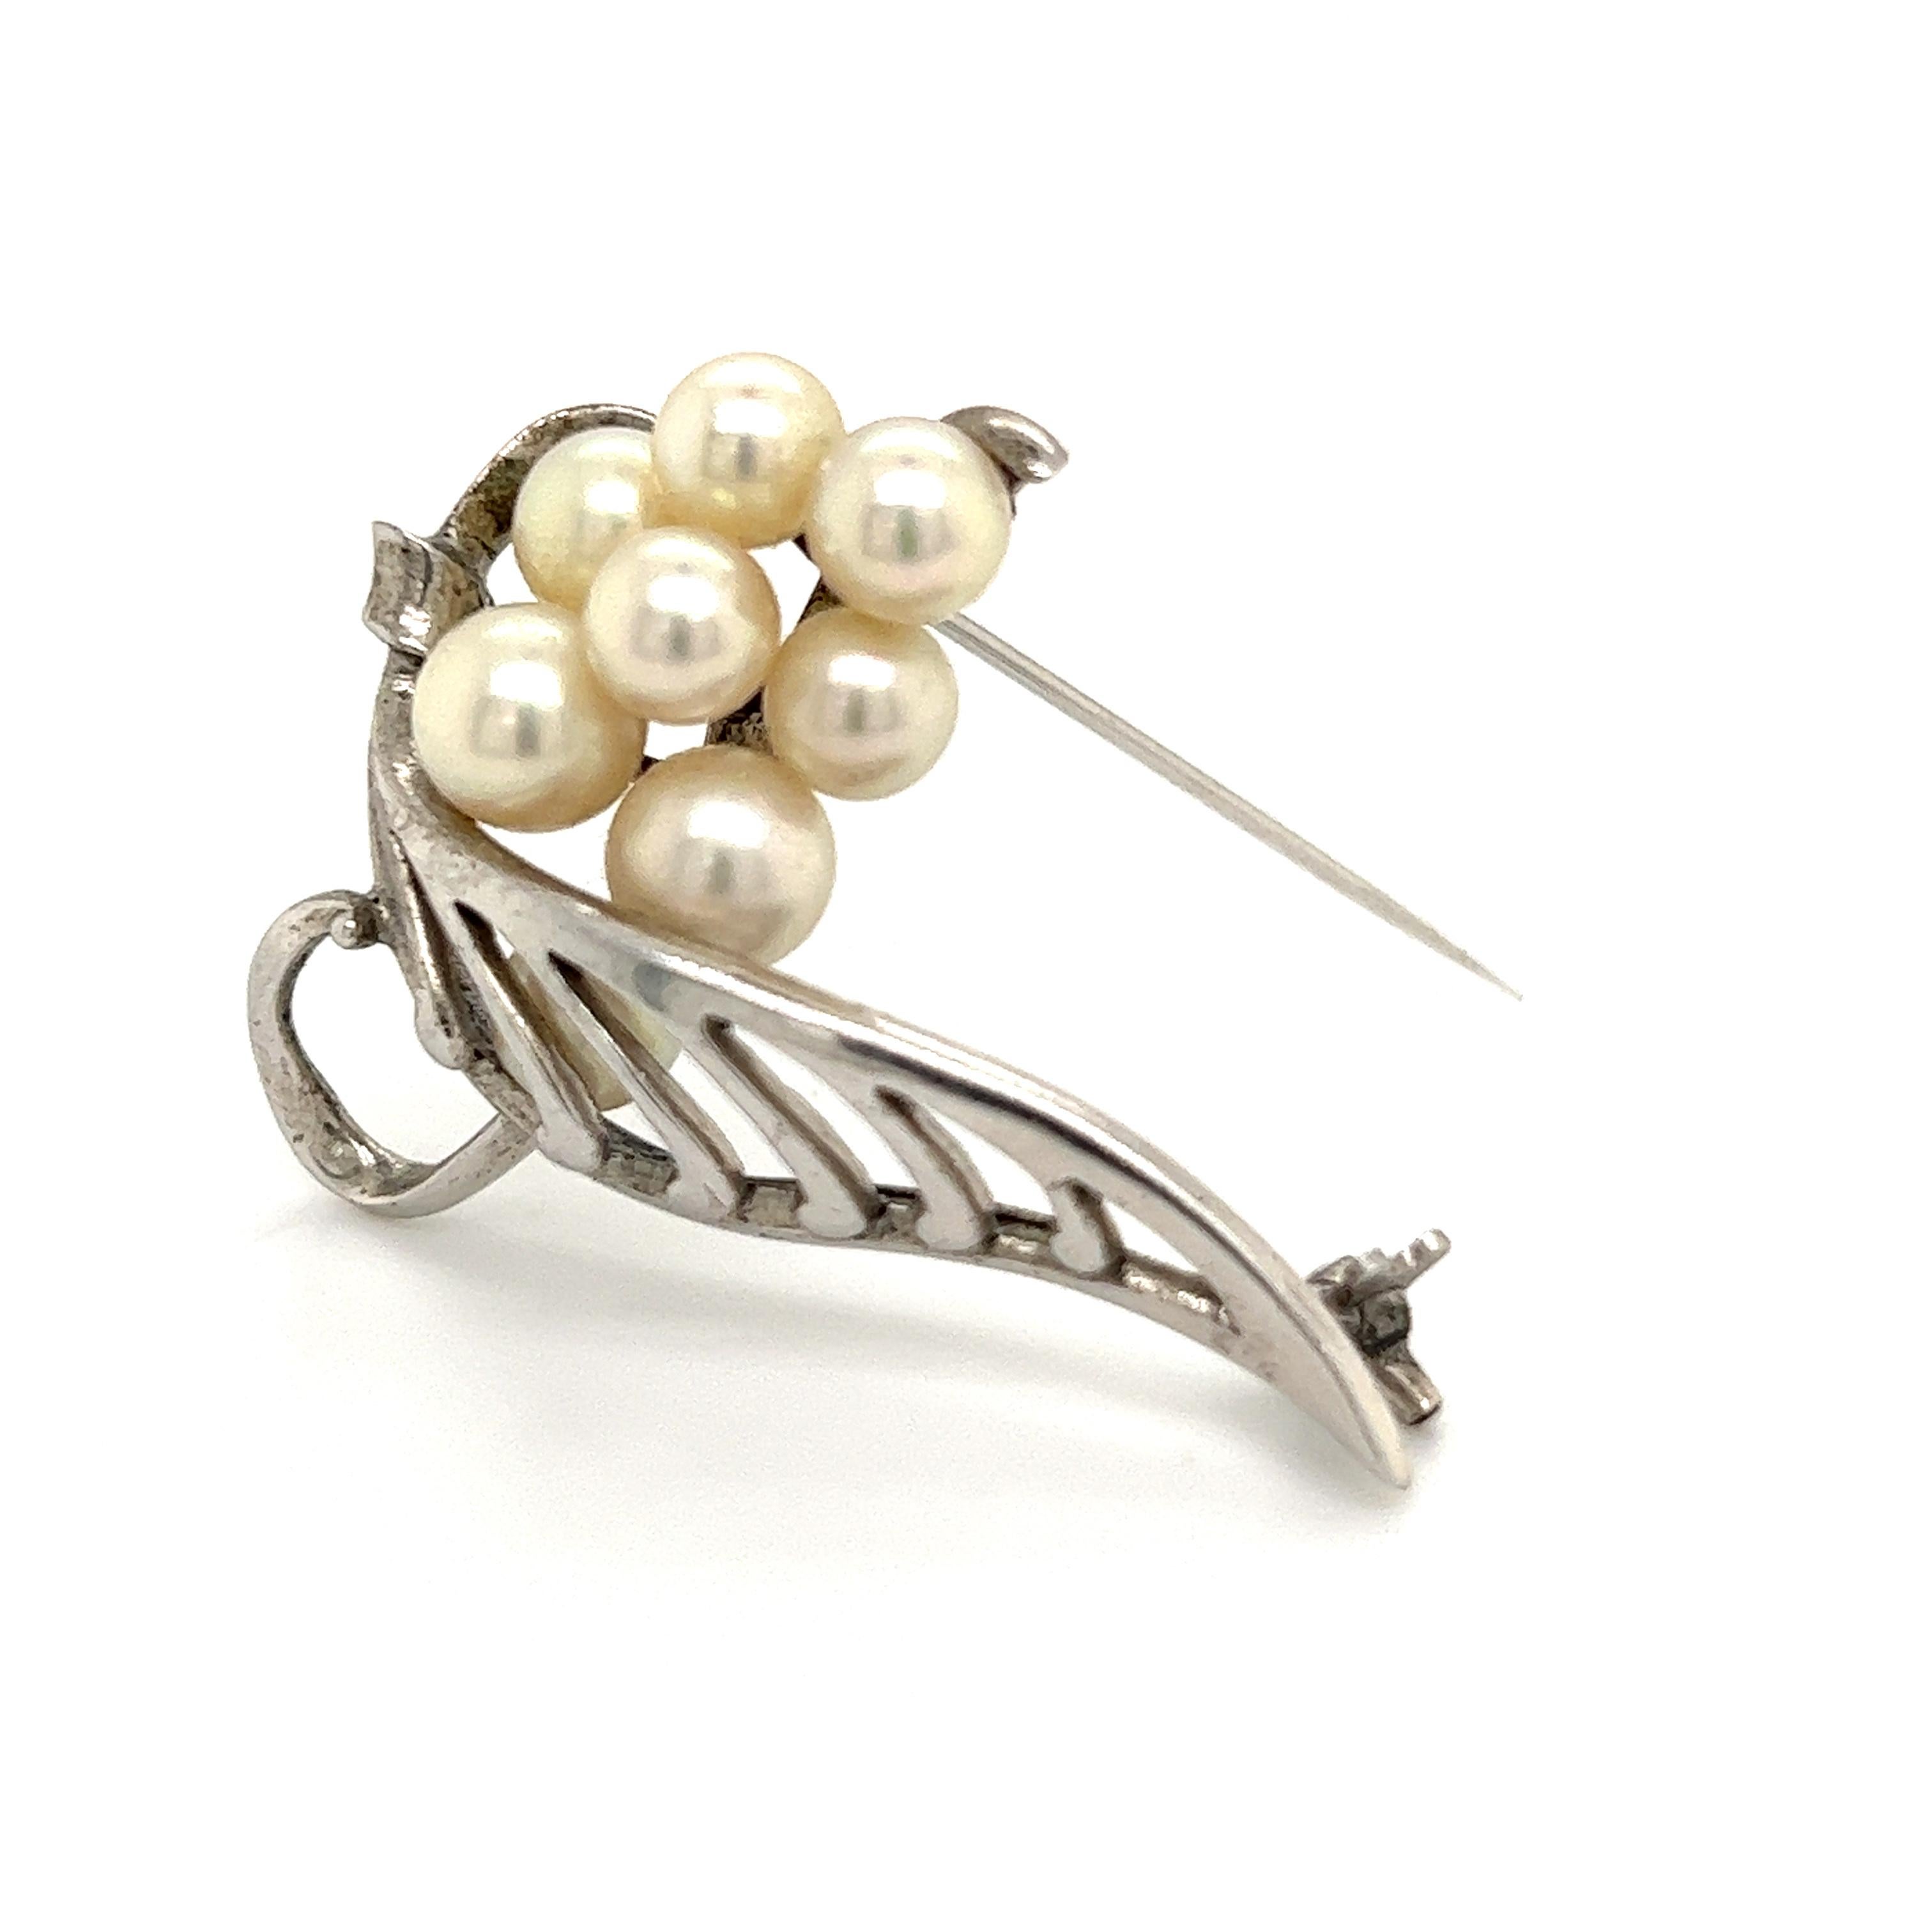 Mikimoto Estate Akoya Pearl Brooch Sterling Silver 6.50 mm M261

This elegant Authentic Mikimoto Silver brooch has 7 Saltwater Akoya Cultured Pearls ranging in size from 5.50 mm with a weight of 7.97 Grams.

TRUSTED SELLER SINCE 2002

PLEASE SEE OUR